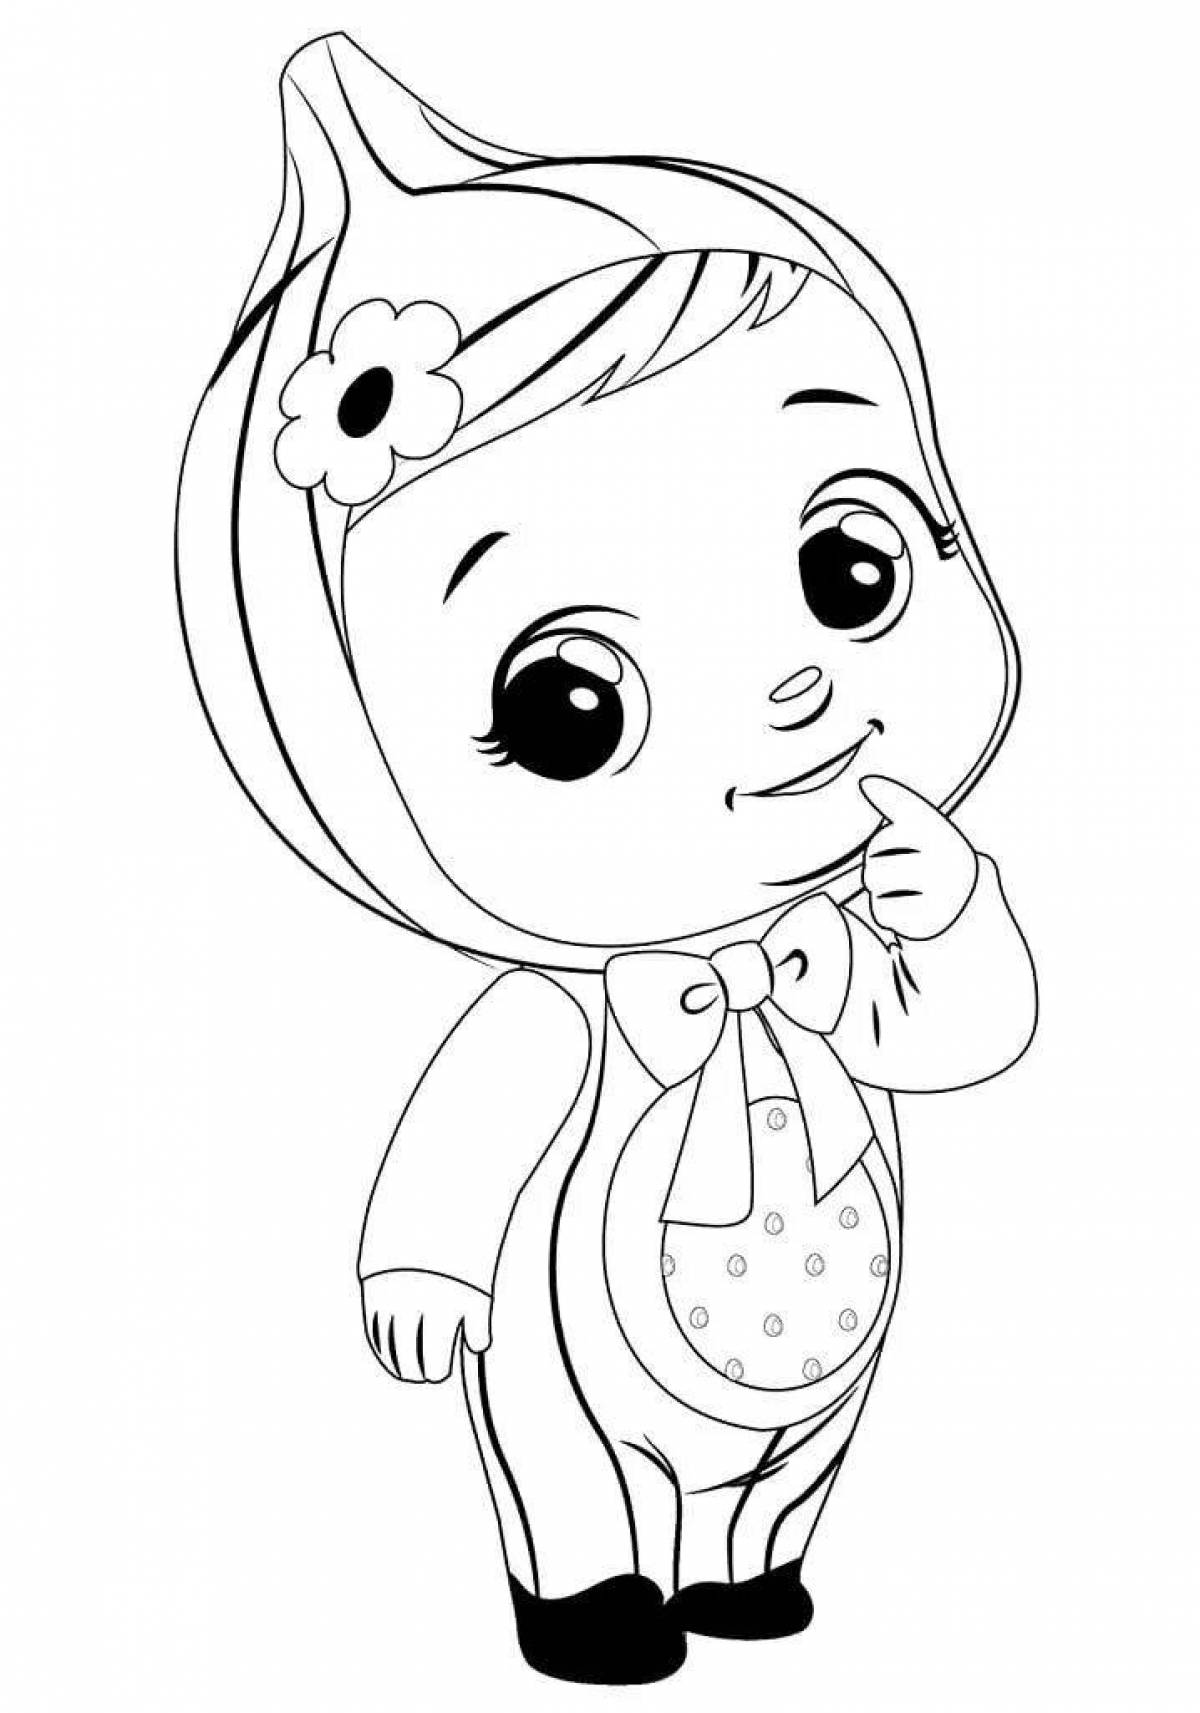 Colorful crying baby coloring page